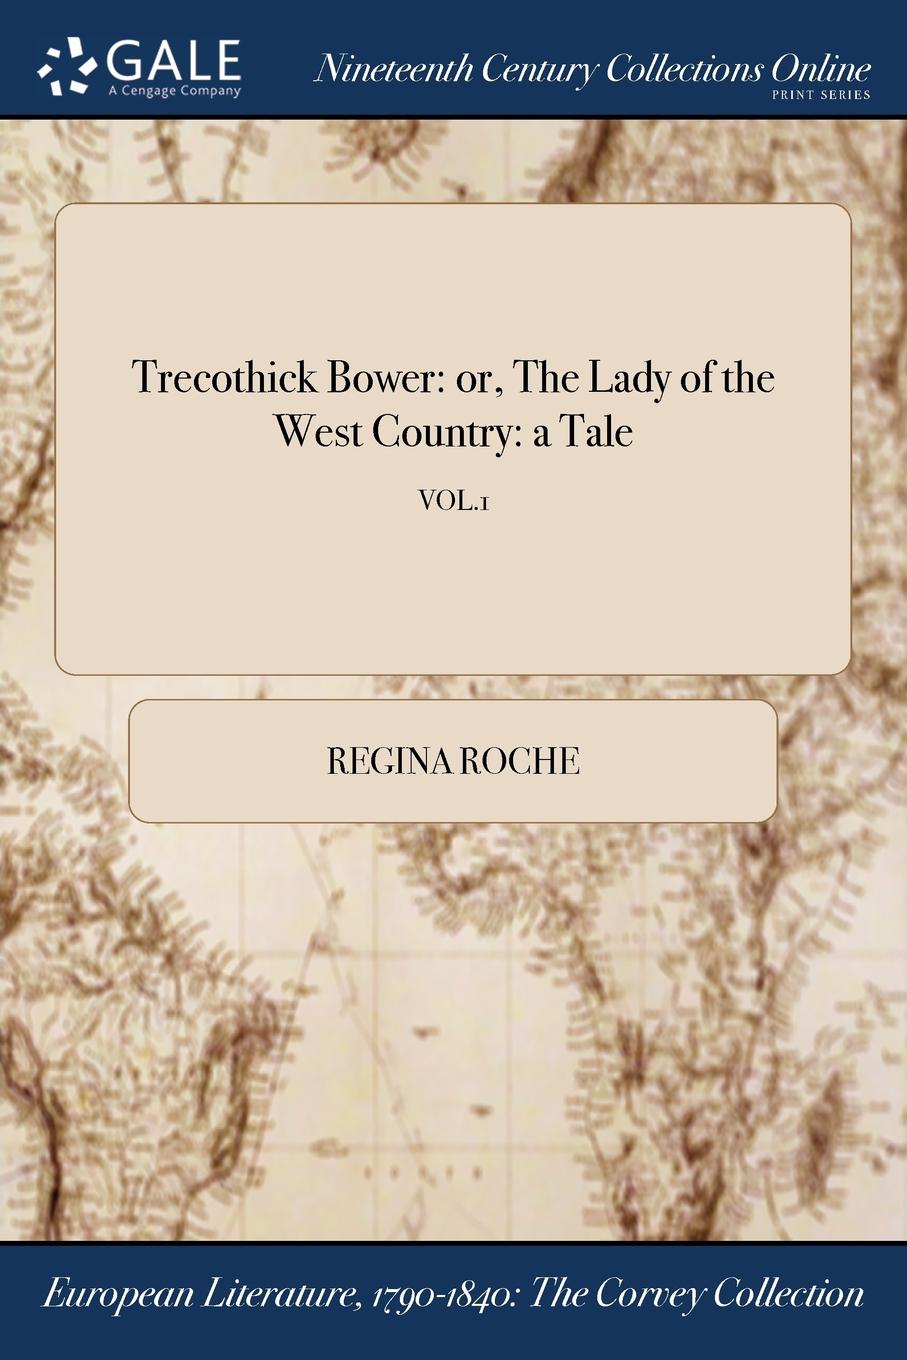 Trecothick Bower. or, The Lady of the West Country: a Tale; VOL.1